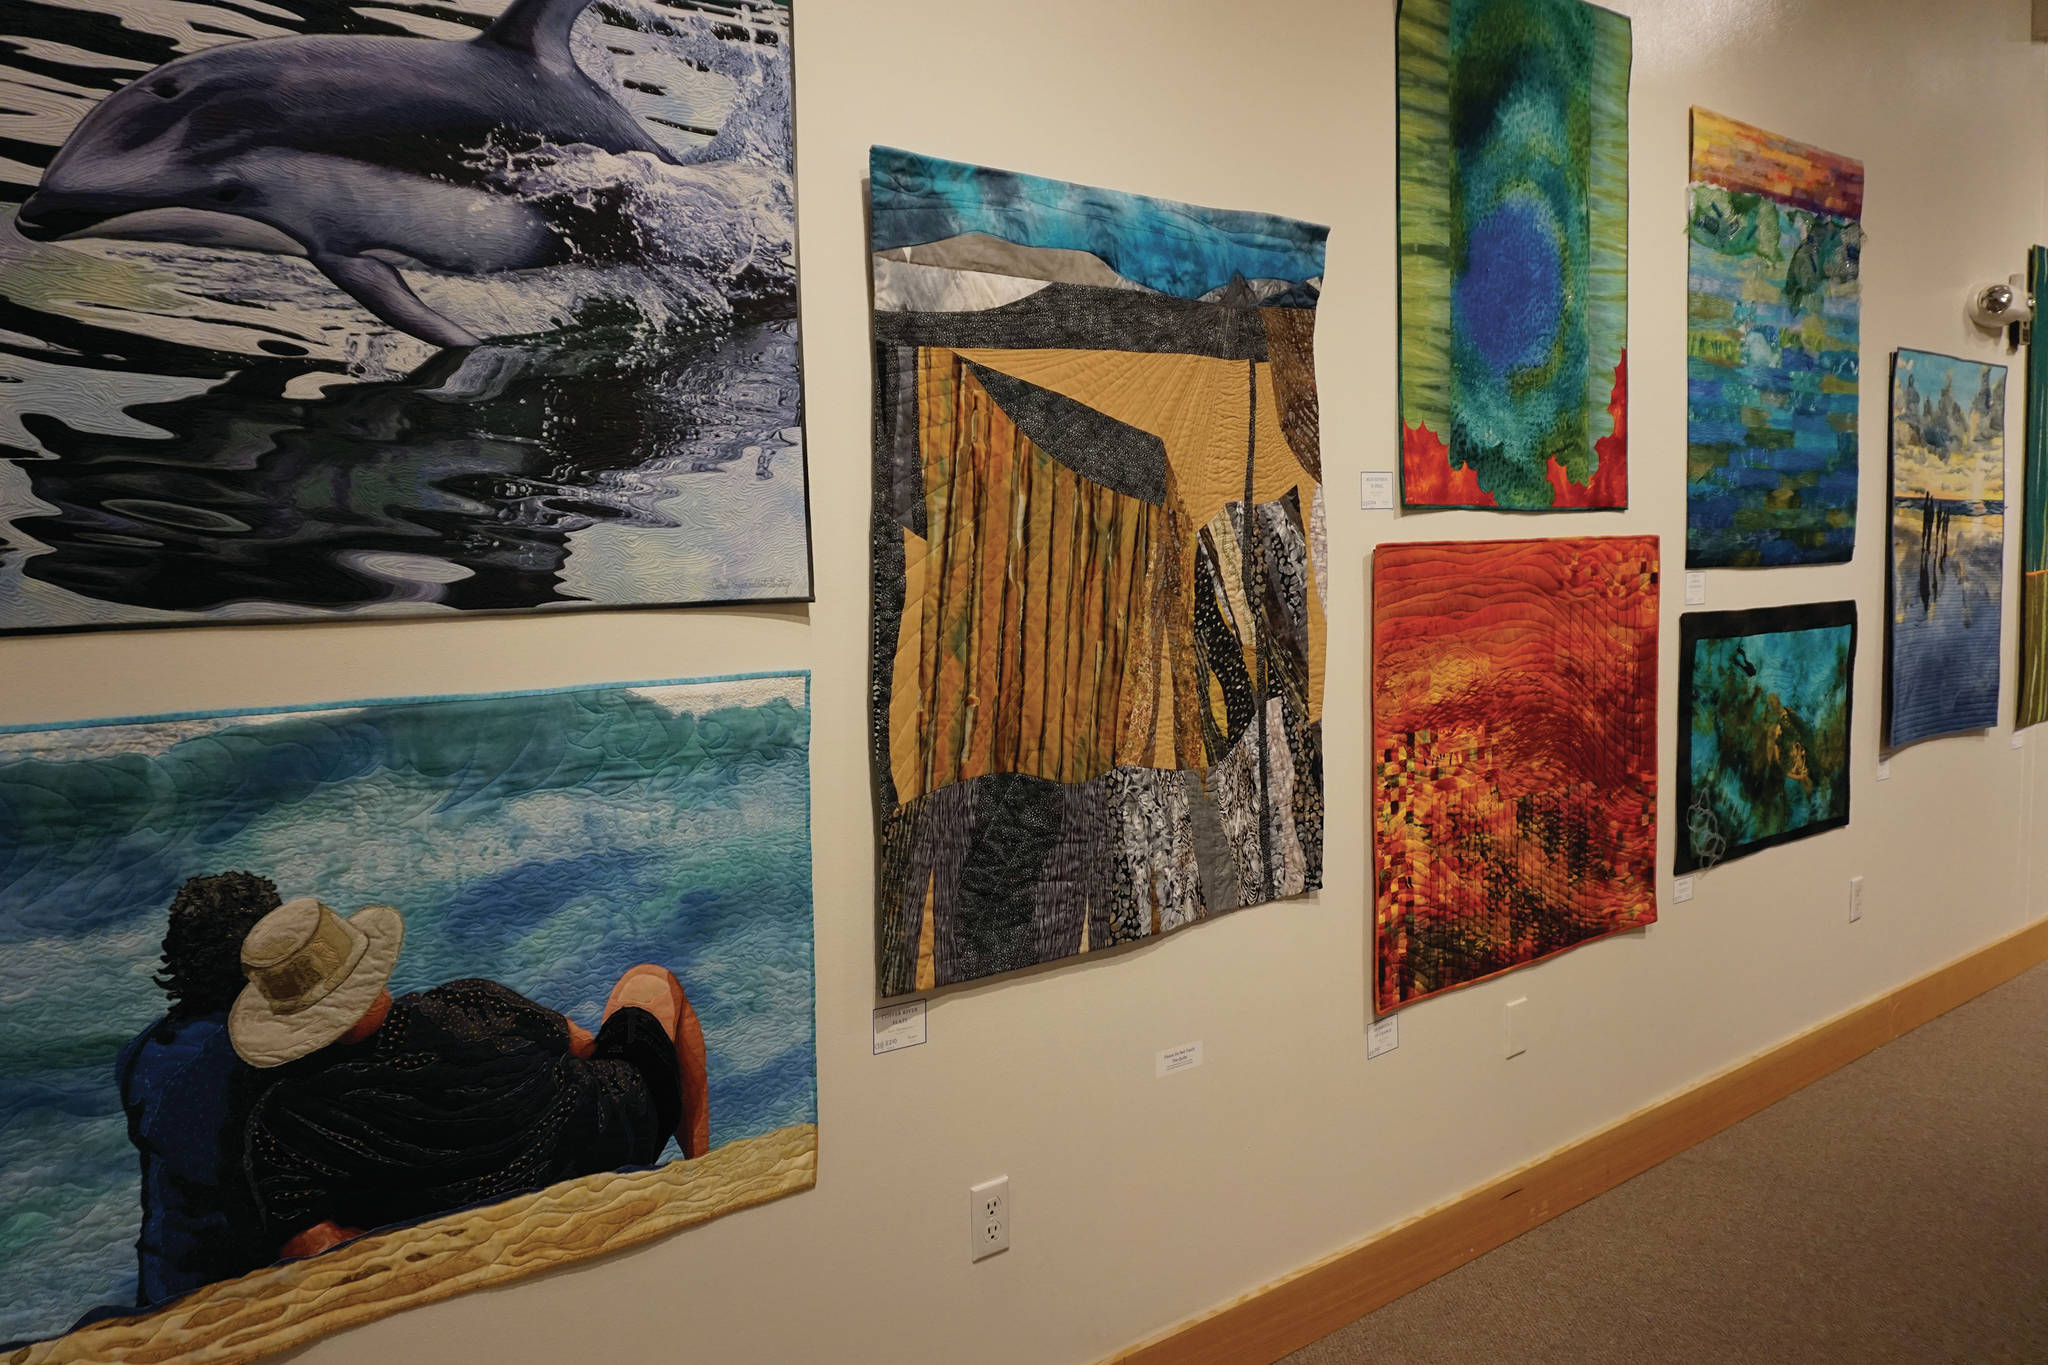 Some of the 45 art quilts featured in “Shifting Tides: Cloth in Convergence,” on exhibit from Oct. 9 to Nov. 28, 2020, at the Pratt Museum in Homer, Alaska. (Photo by Michael Armstrong/Homer News)